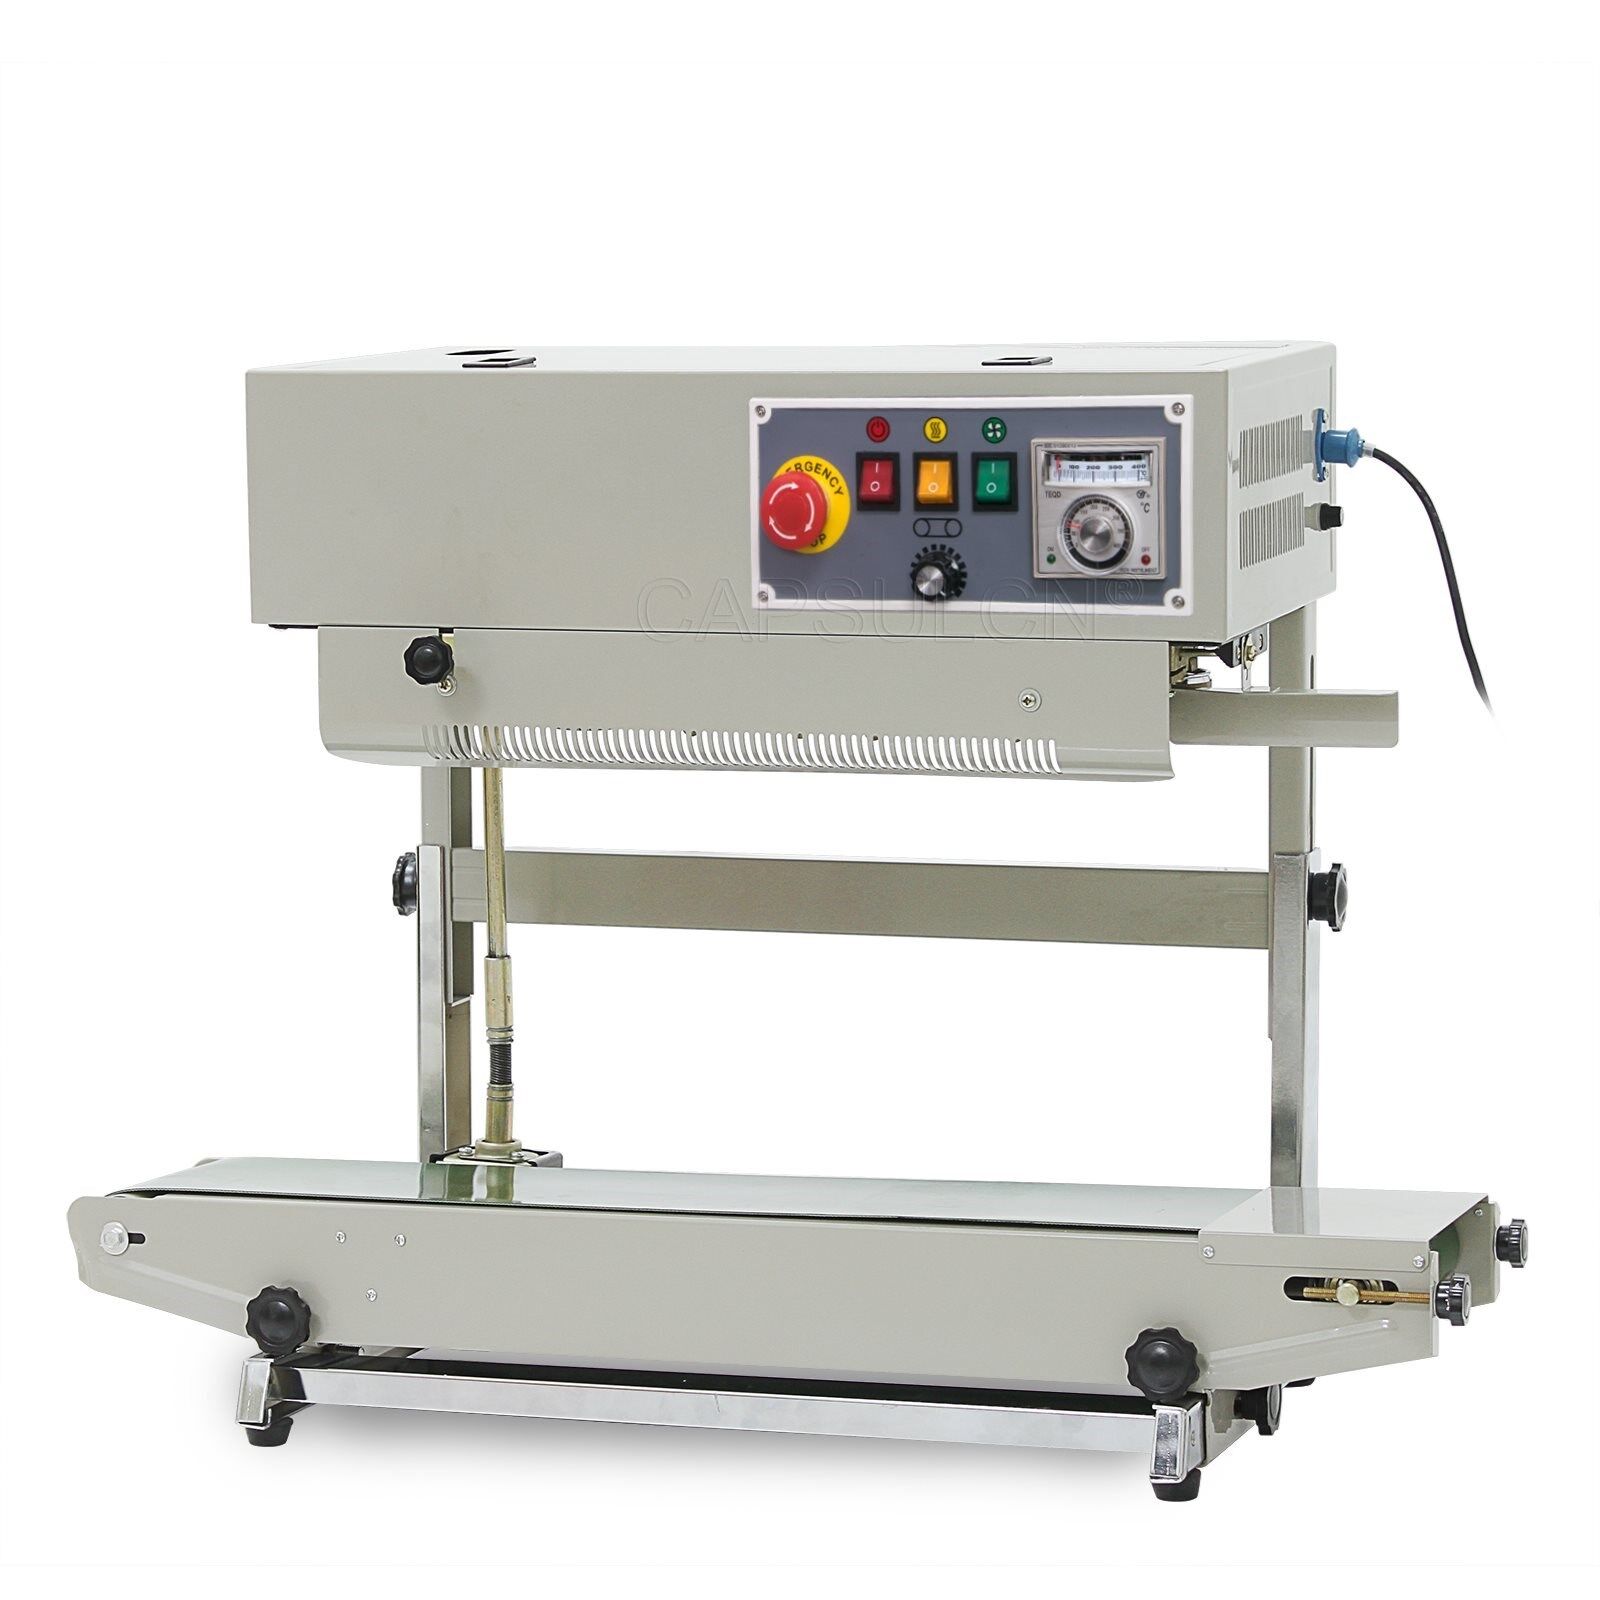 https://cdn.capsulcn.com/content/images/thumbs/0005415_automatic-continuous-plastic-bag-sealing-machine-with-coding-printer-fr-900v.jpeg?image_process=resize,l_960